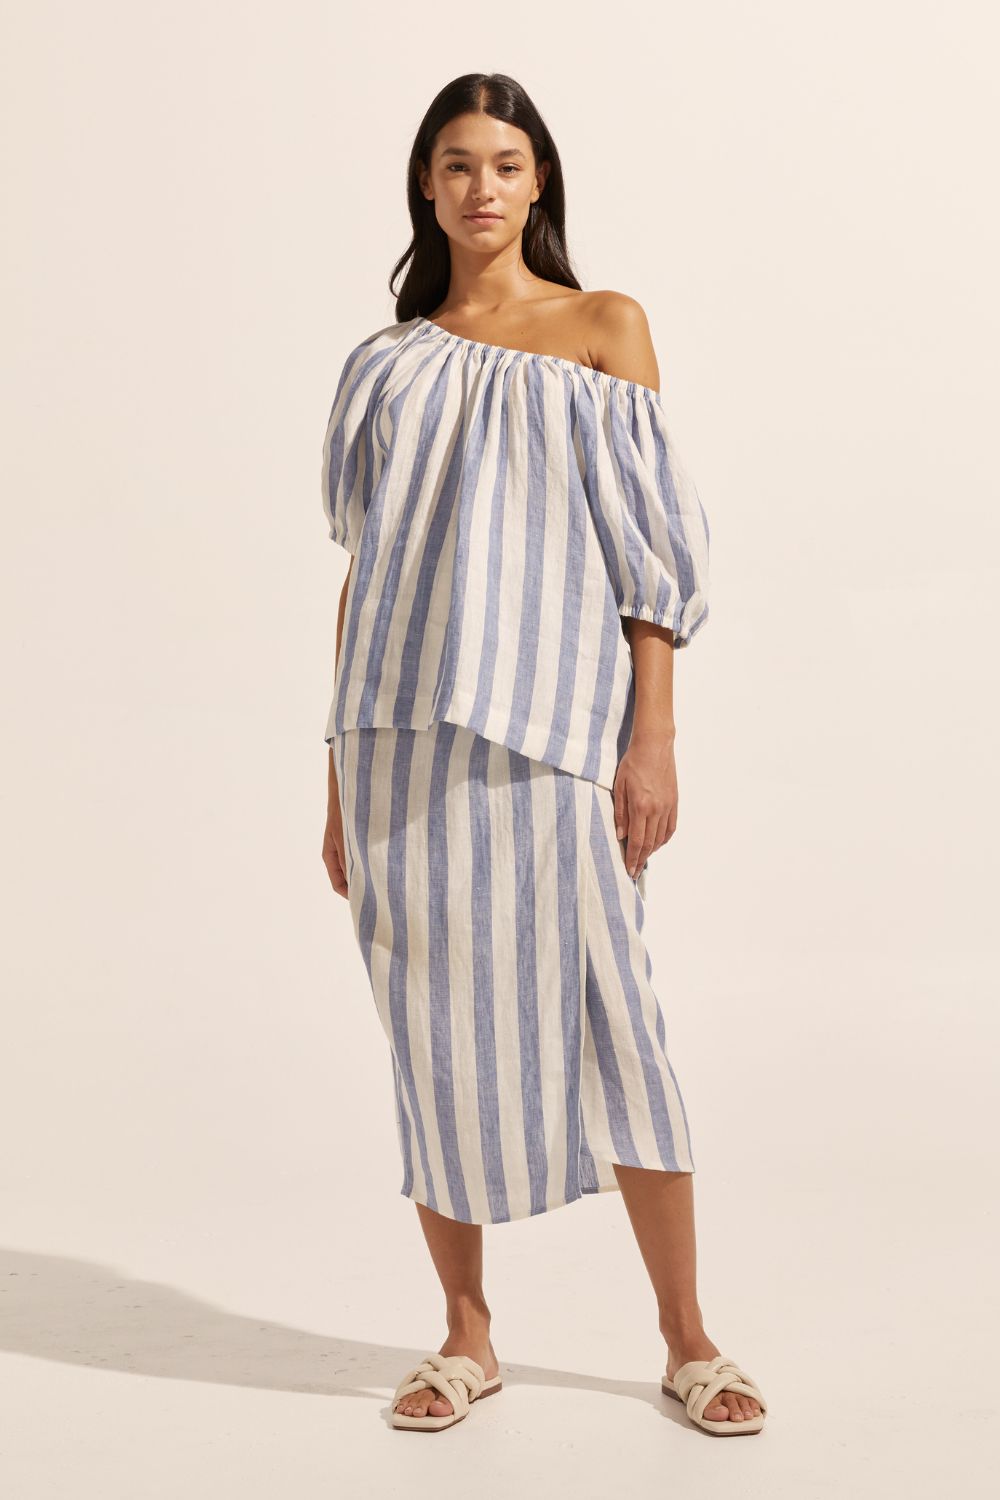 blue and white stripe, top, off the shoulder, mid length sleeve, front image